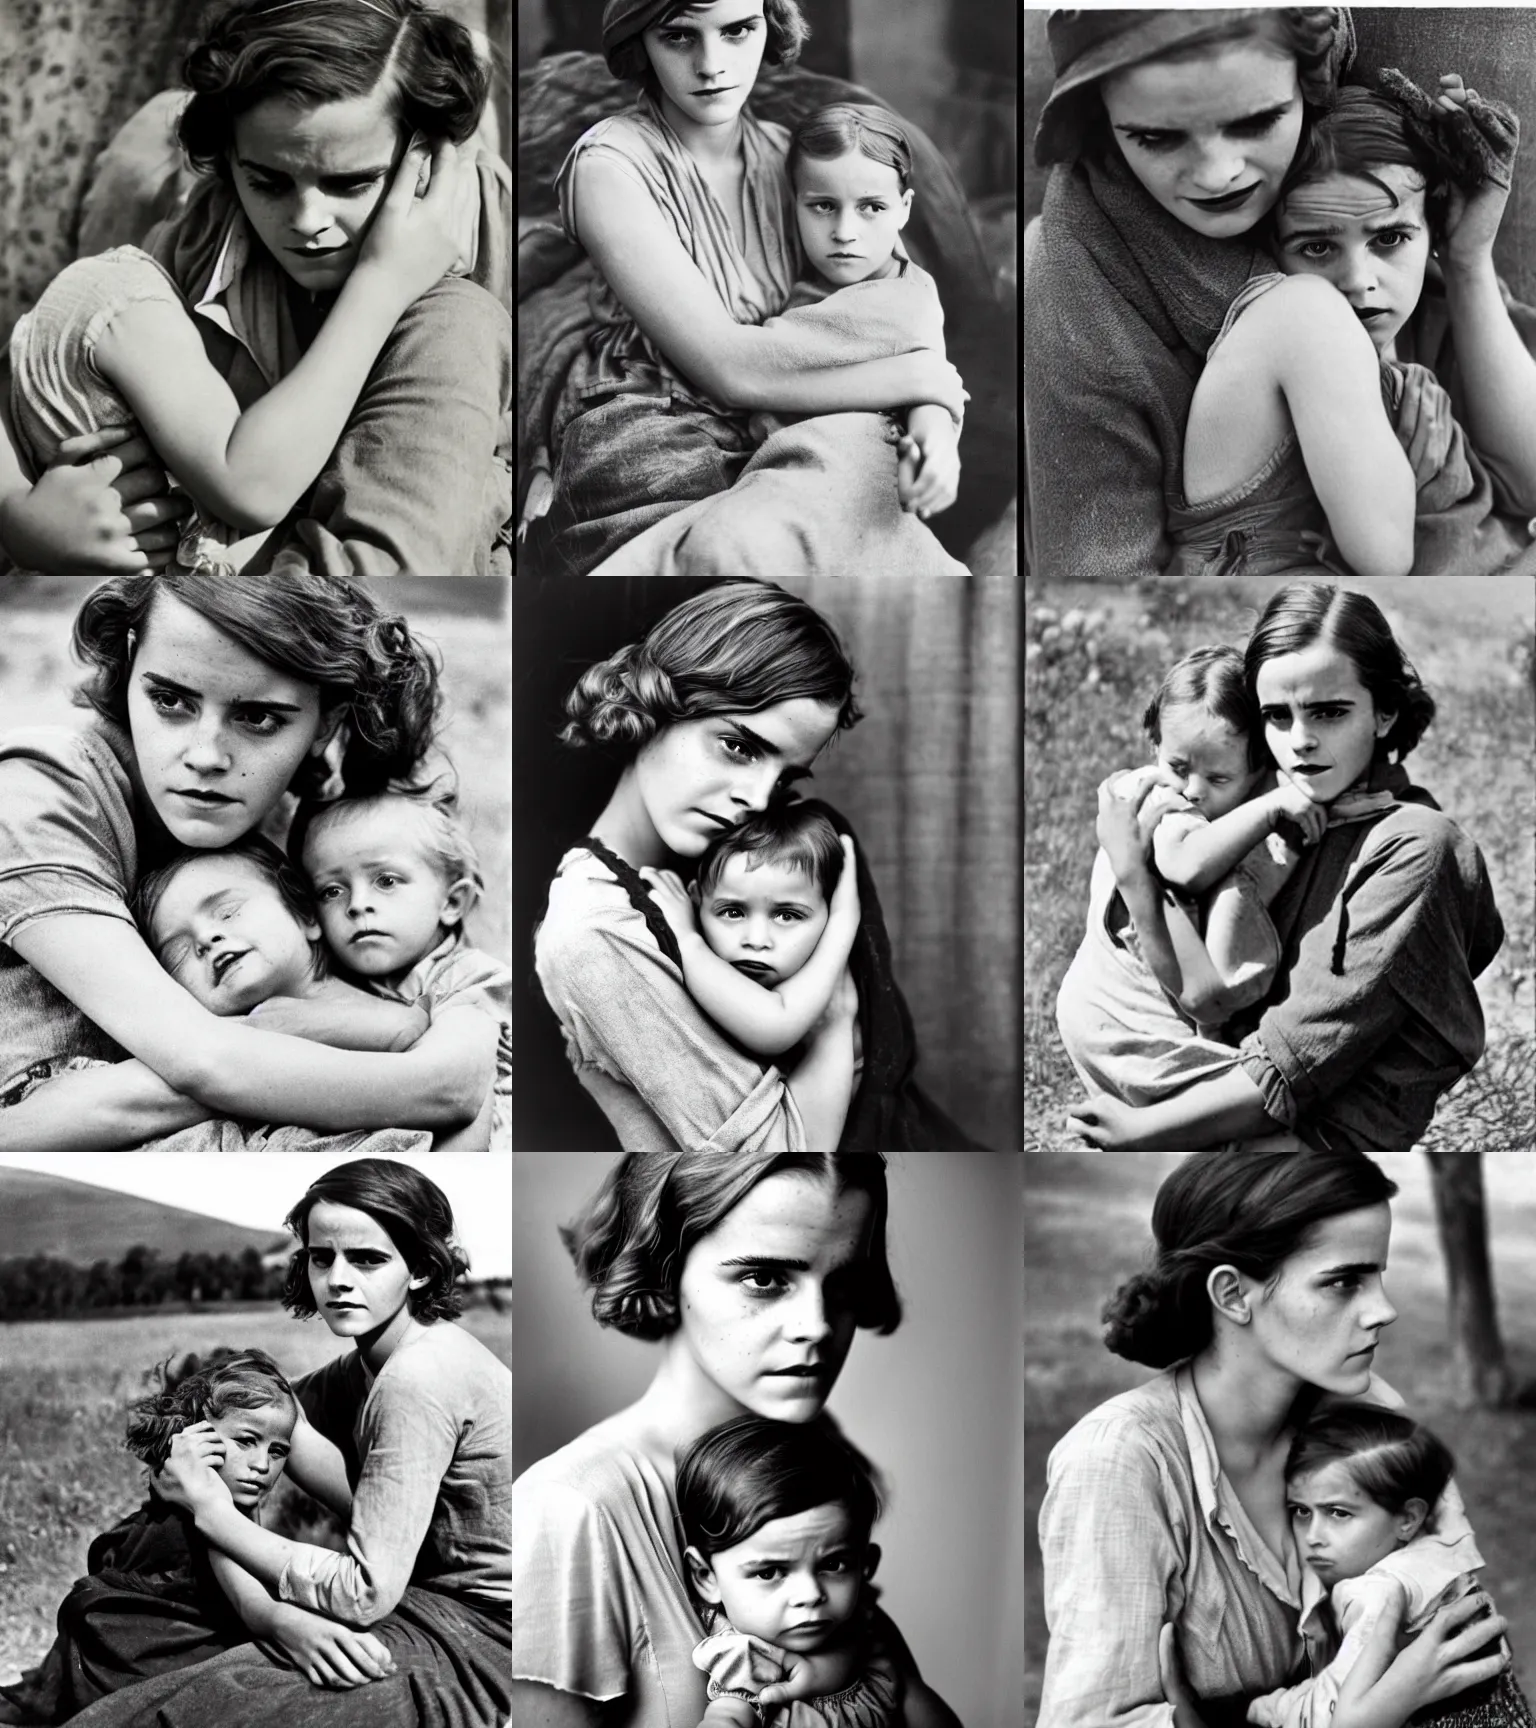 Prompt: Emma Watson as migrant mother, 1936, gritty depression era photo by Dorothea Lange